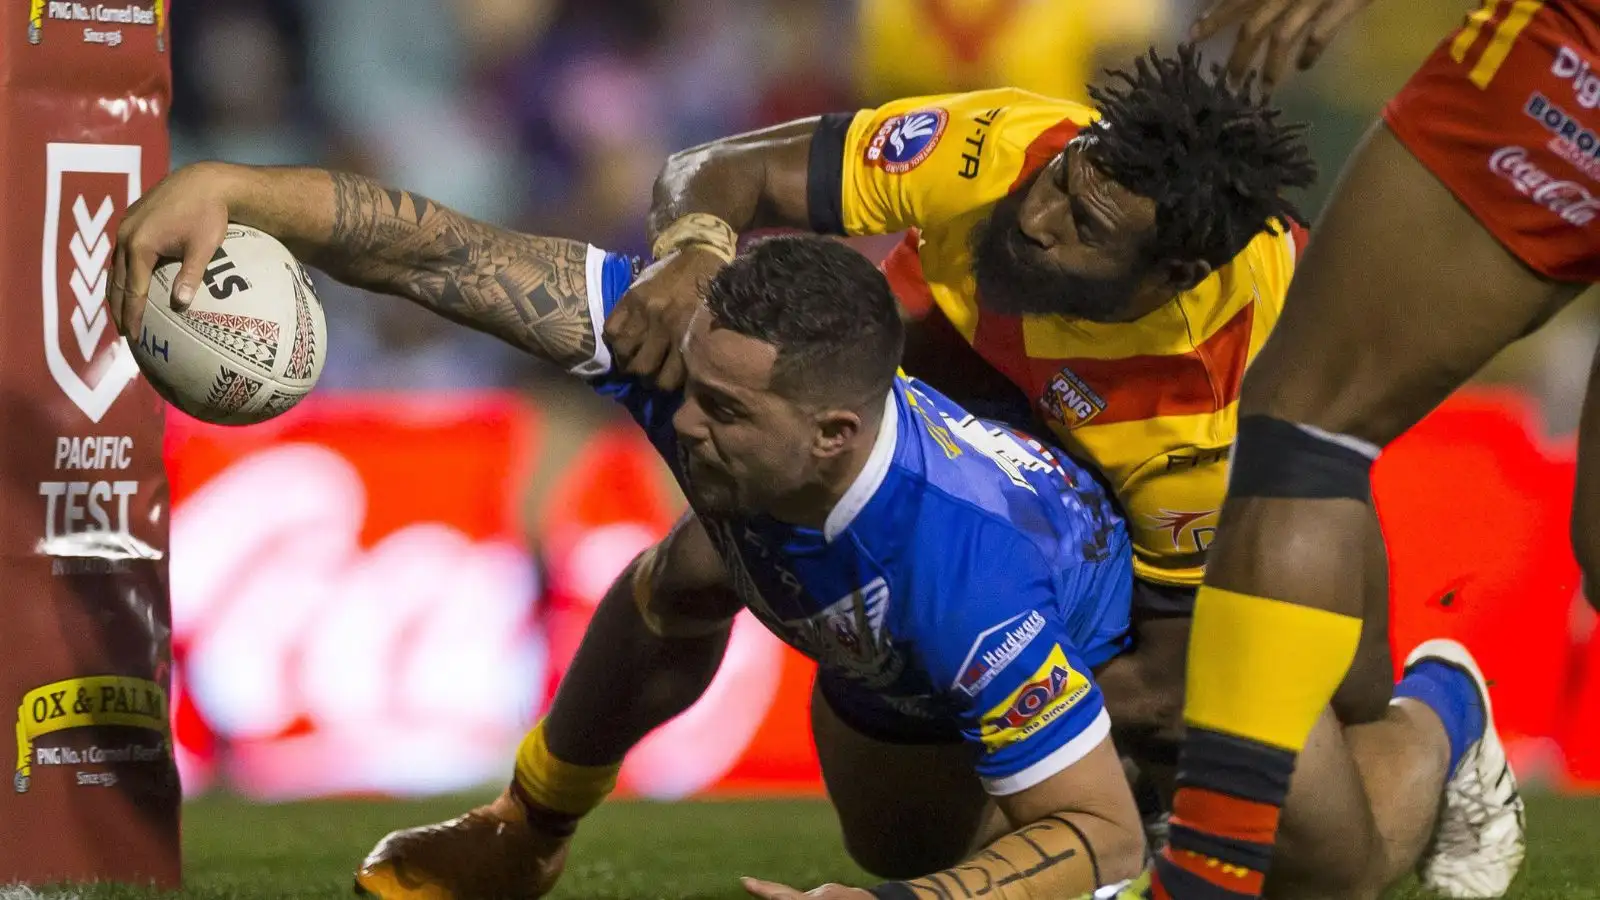 League 1 quartet & Championship duo charged by RFL, including Papua New Guinea international